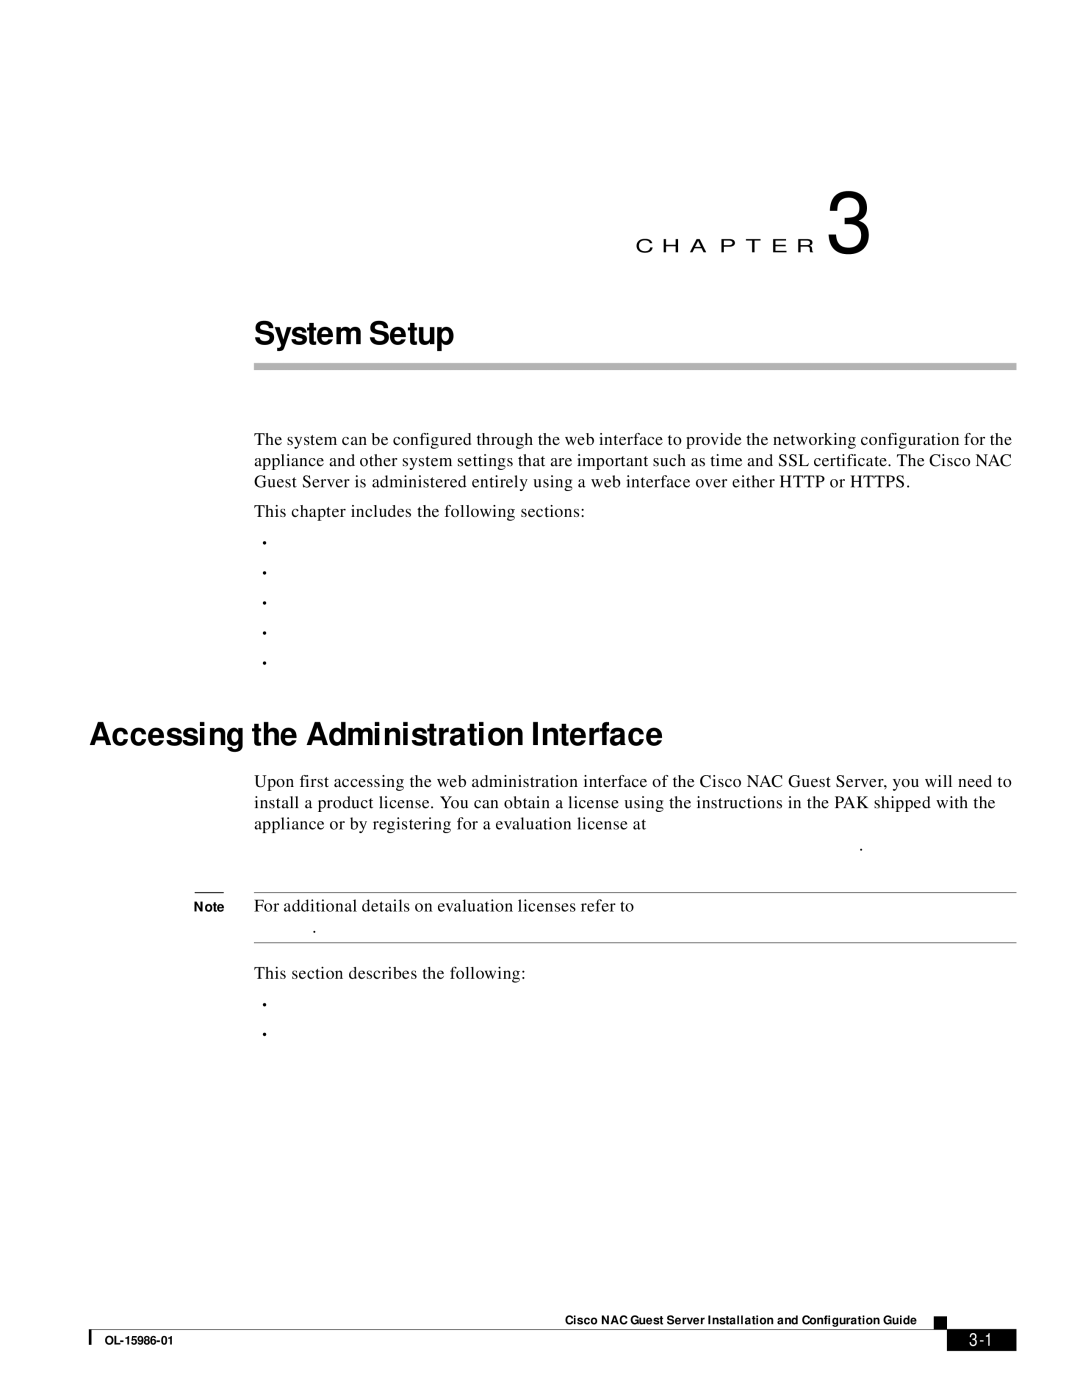 Cisco Systems OL-15986-01 manual System Setup, Accessing the Administration Interface 